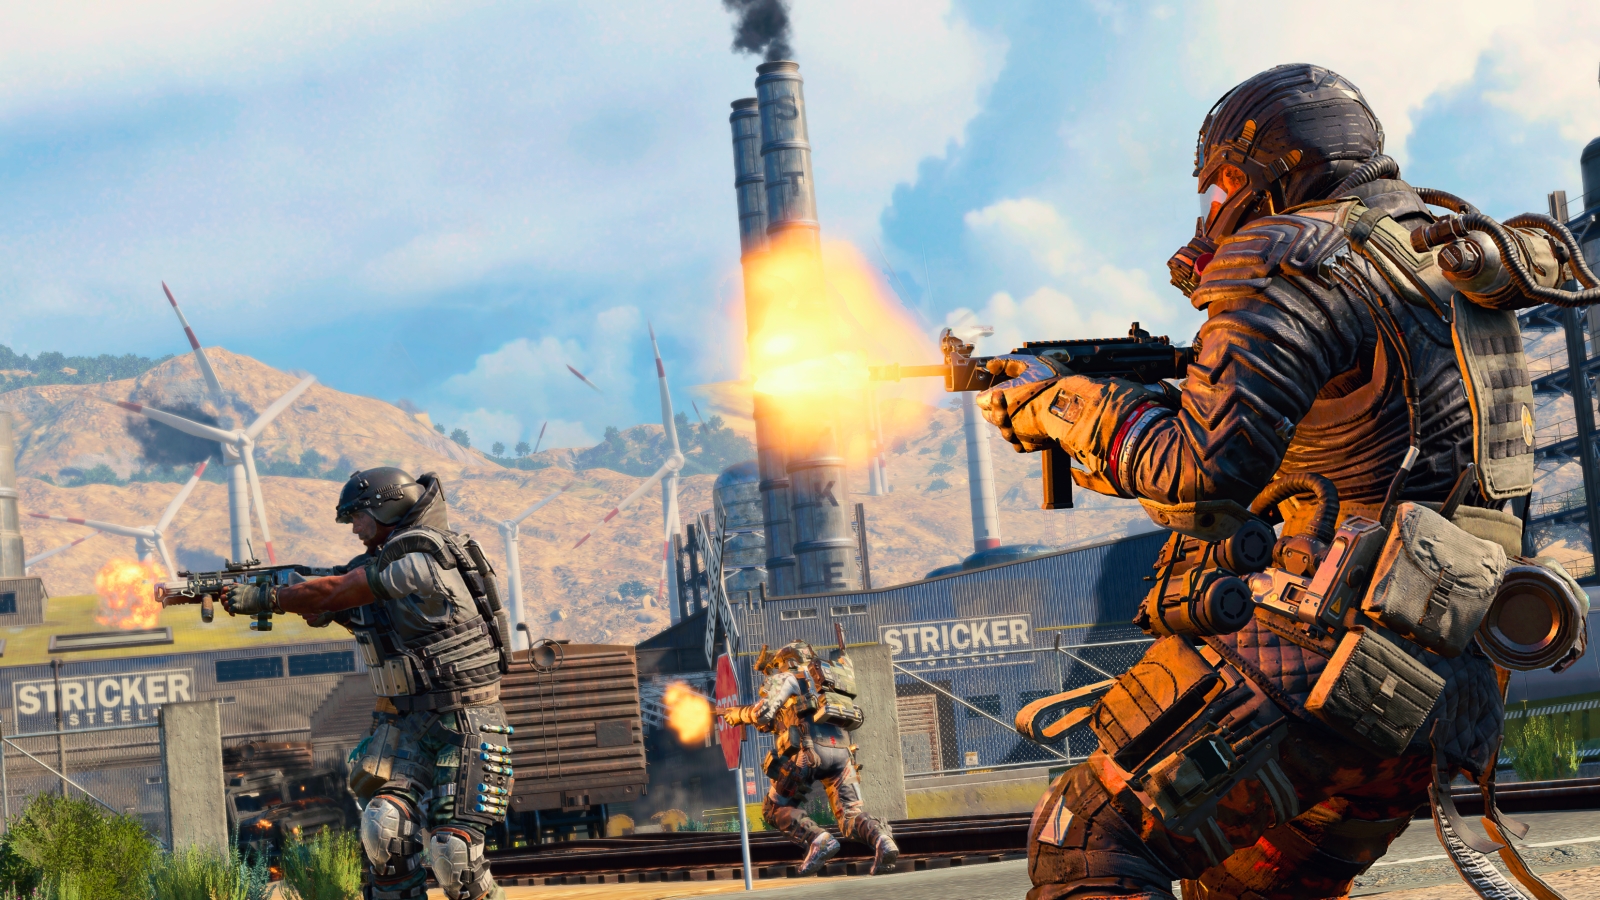 Call-of-Duty-Blackout-Best-weapons-guide-PC-PS4-Xbox